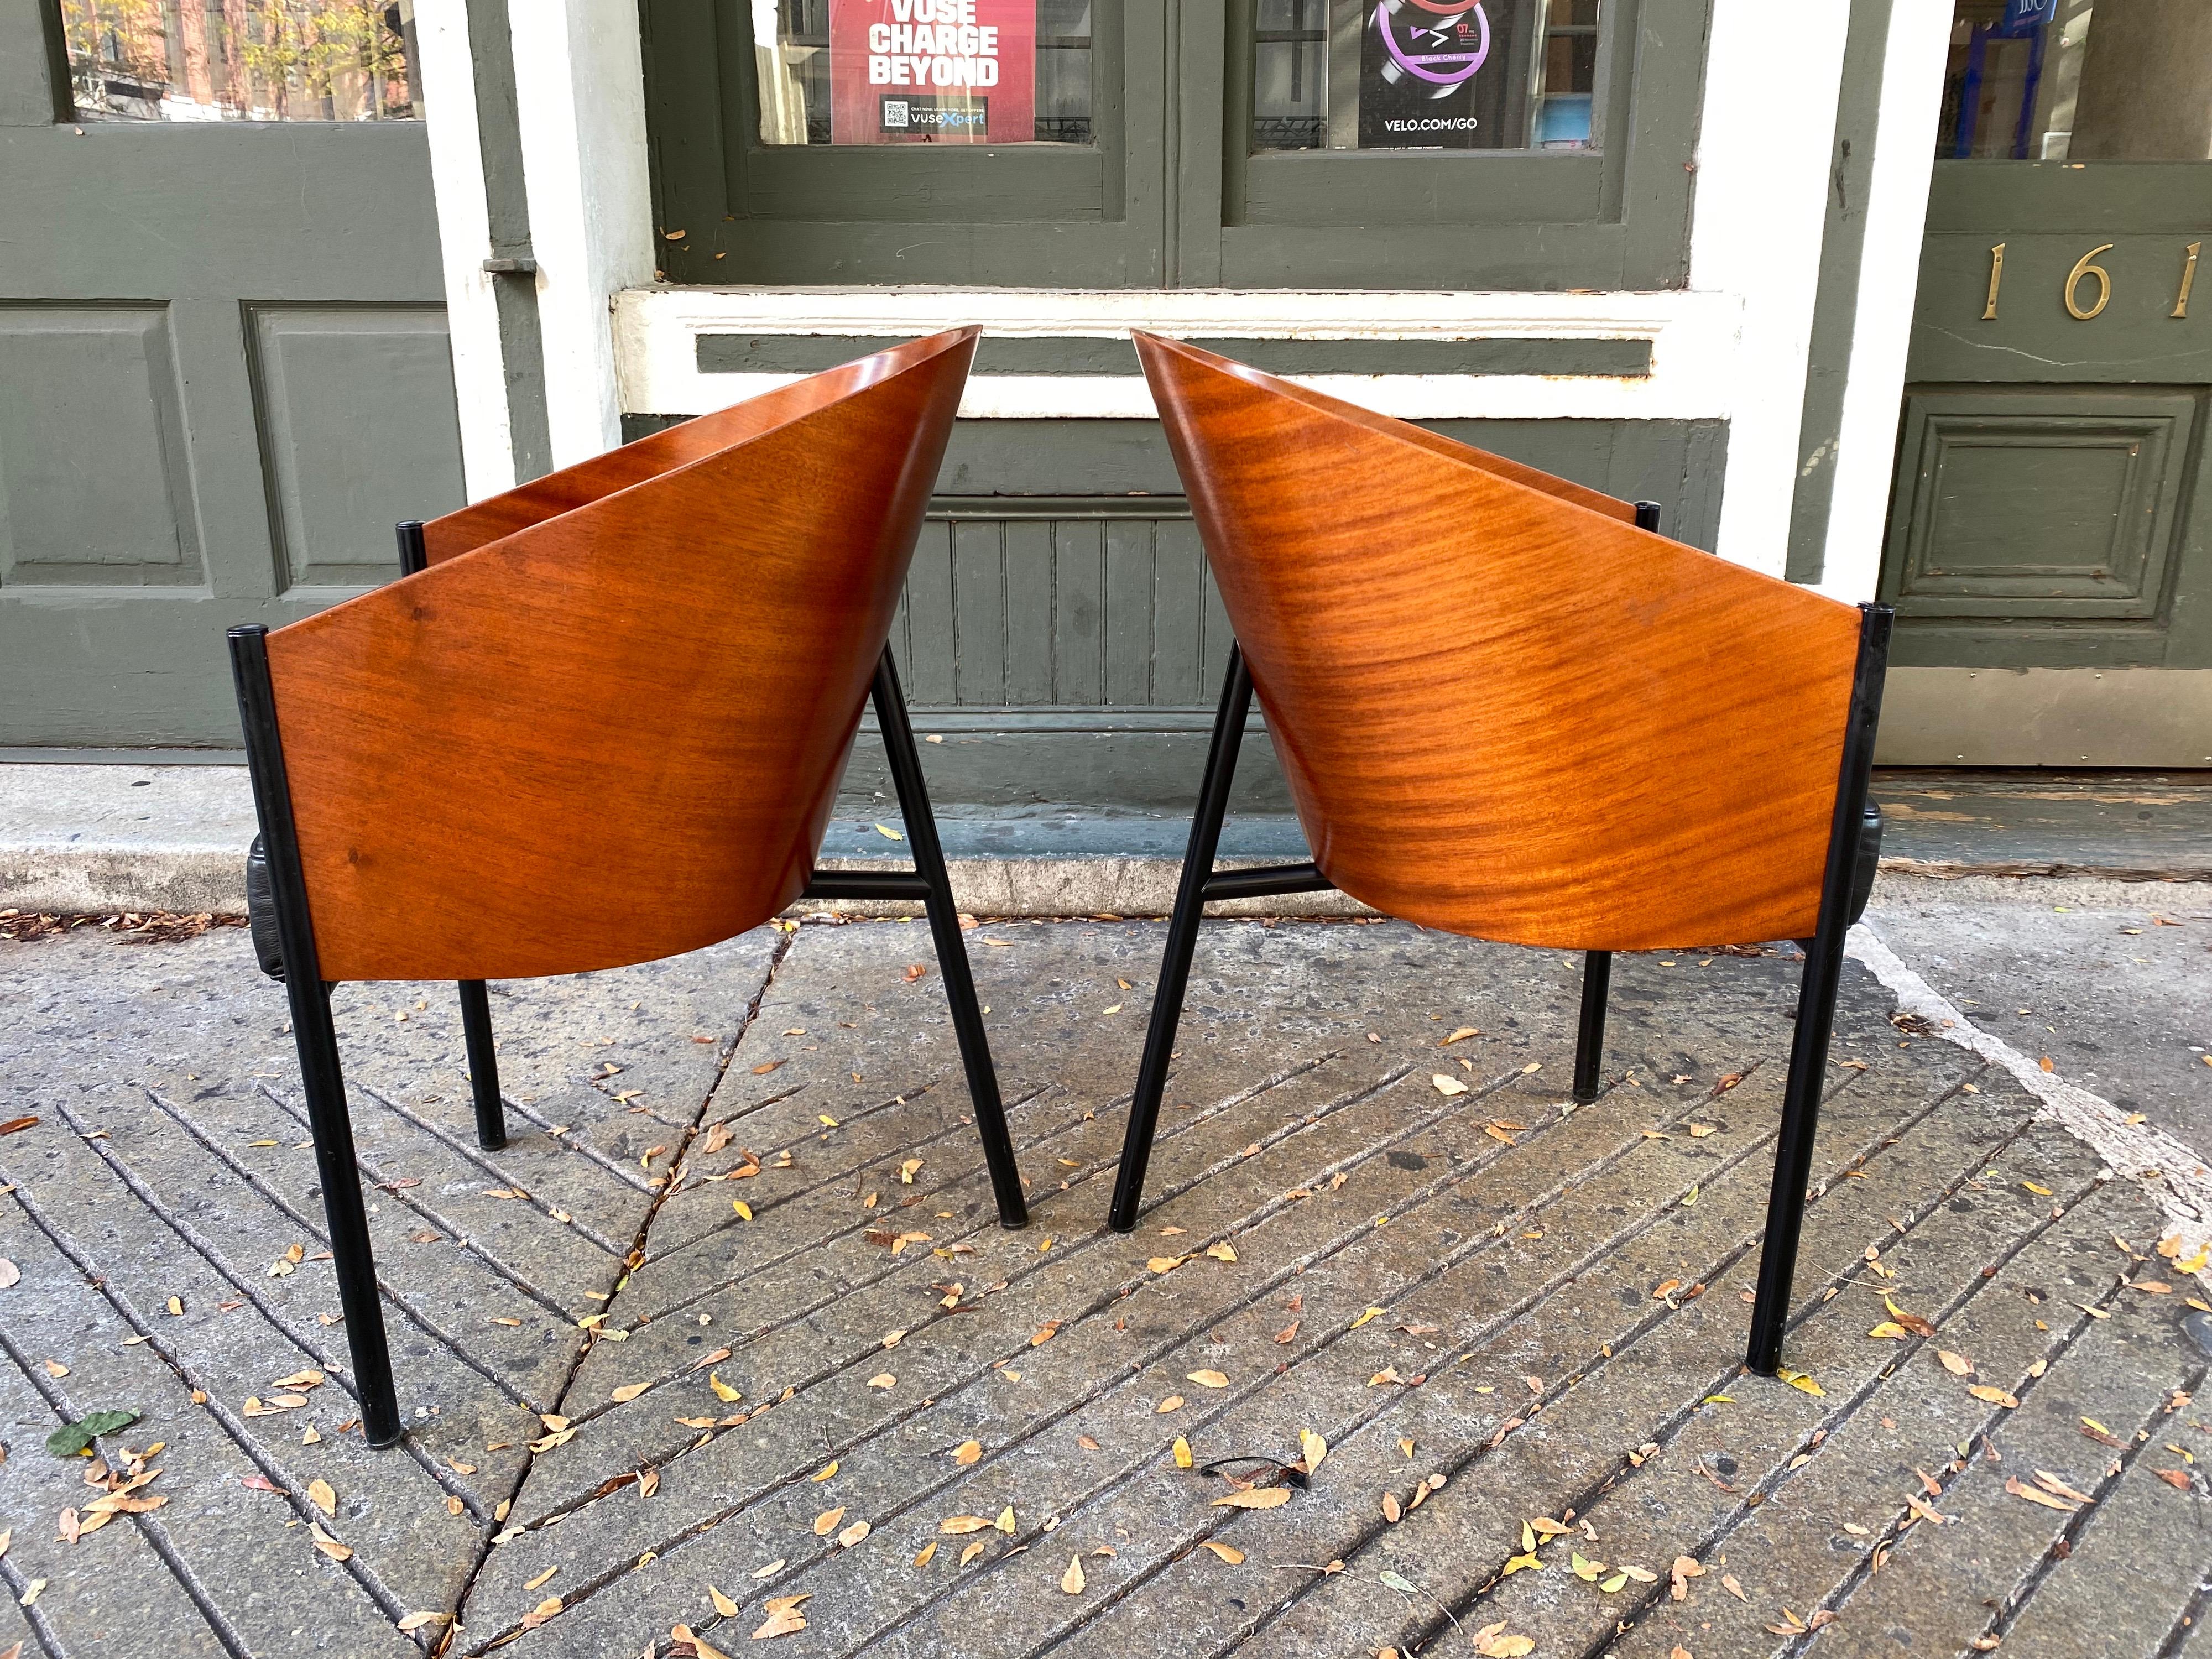 Pair of Philippe Starck King Coste pair of mahogany barrel chairs produced by Driade Aleph . 3 legged metal frame supports a curved back of Mahogany with black leather seats. Overall very nice shape, a little edge wear as seen in photos and one